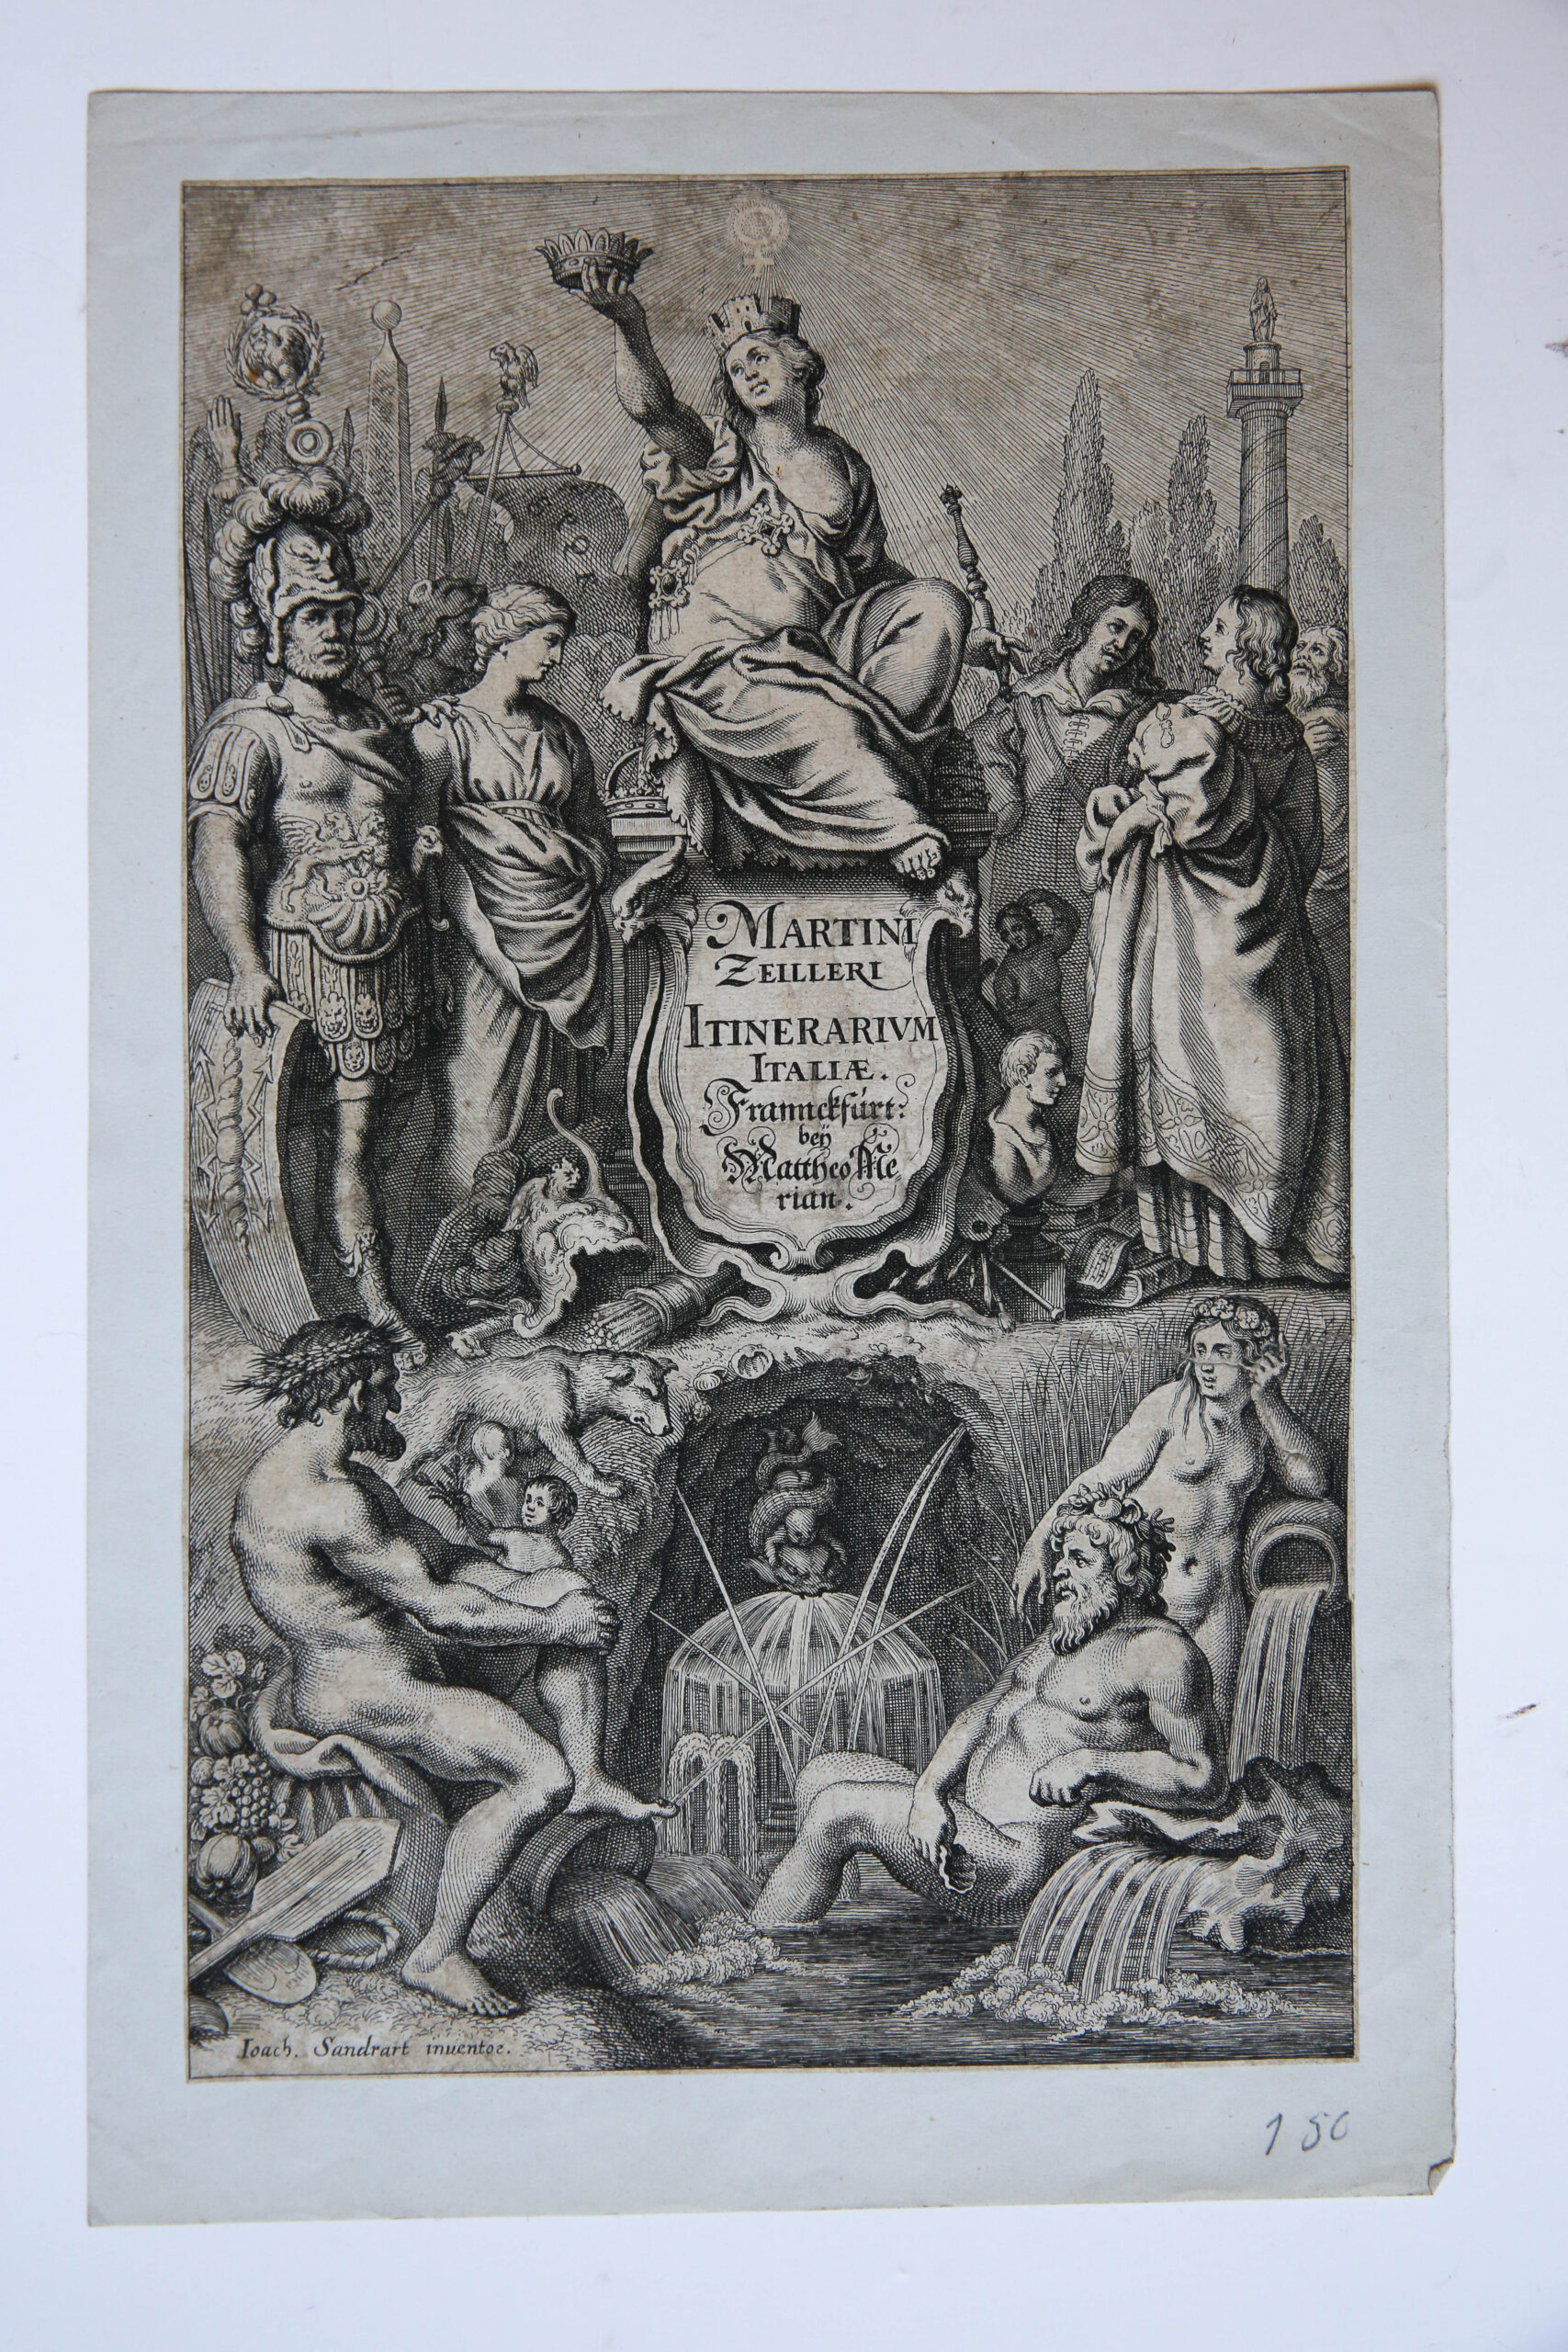 [Antique title page, 1640] Allegory of Italy / Allegorie op Italië [Itinerarium Italiae], published 1640, 1 p.